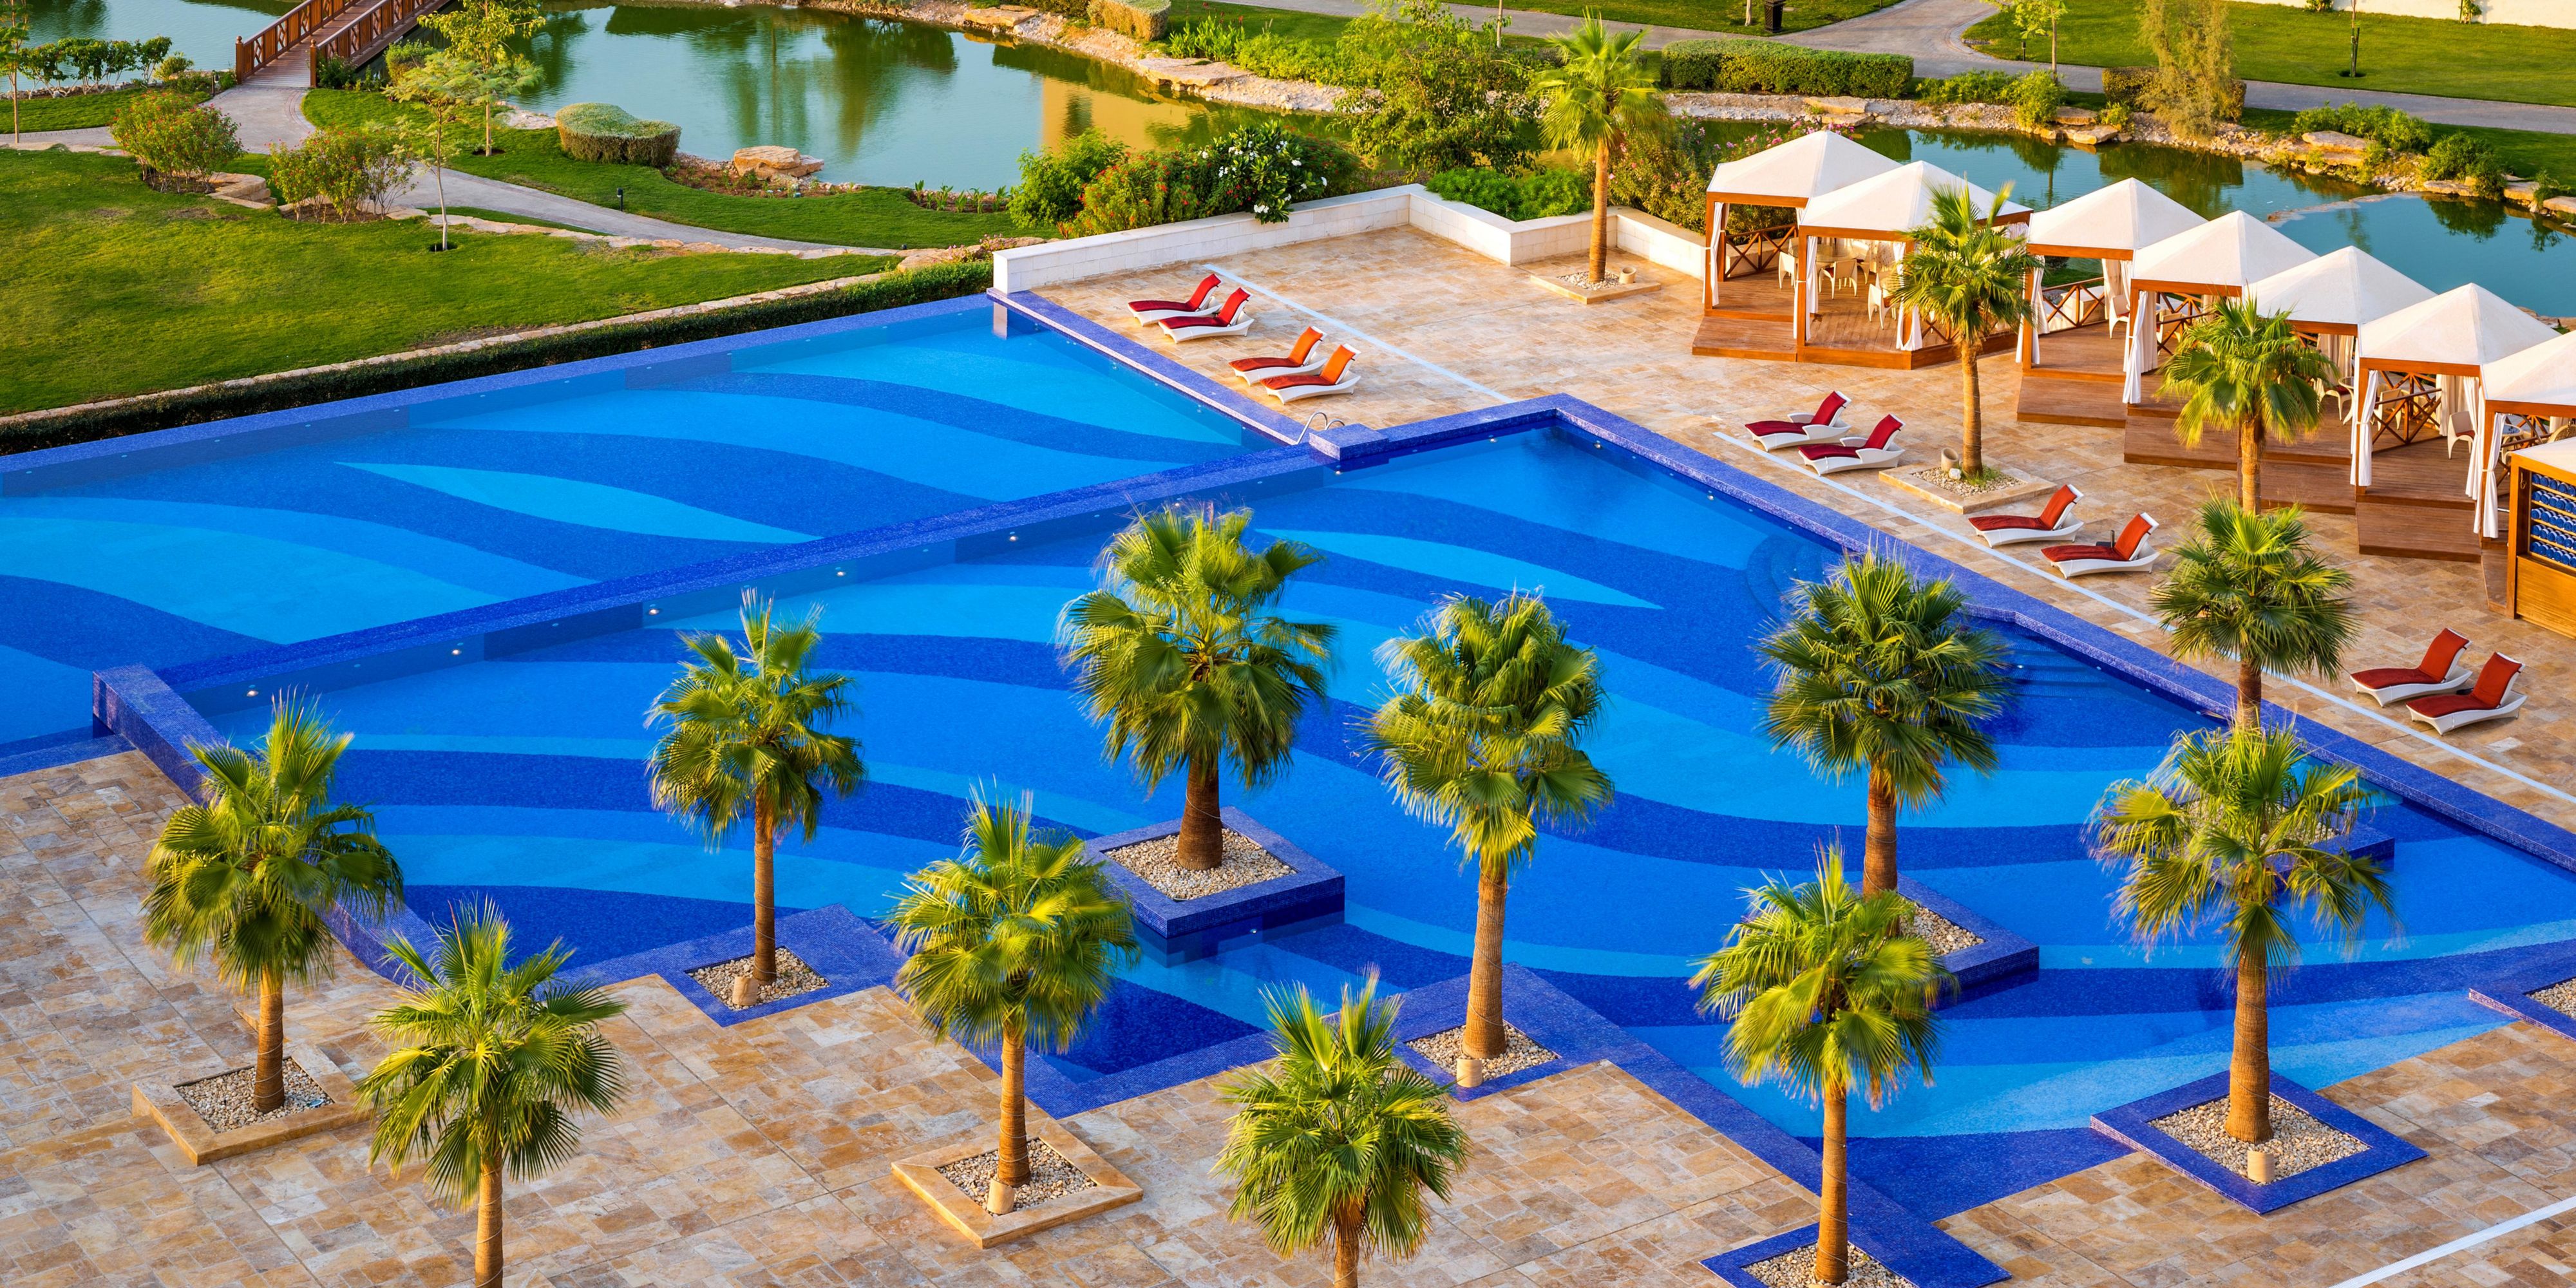 Set on lush grounds and surrounded by desert, our outdoor pools offer you the chance to unwind after a long day of traveling or sightseeing. There is nothing like a refreshing dip in the pool!